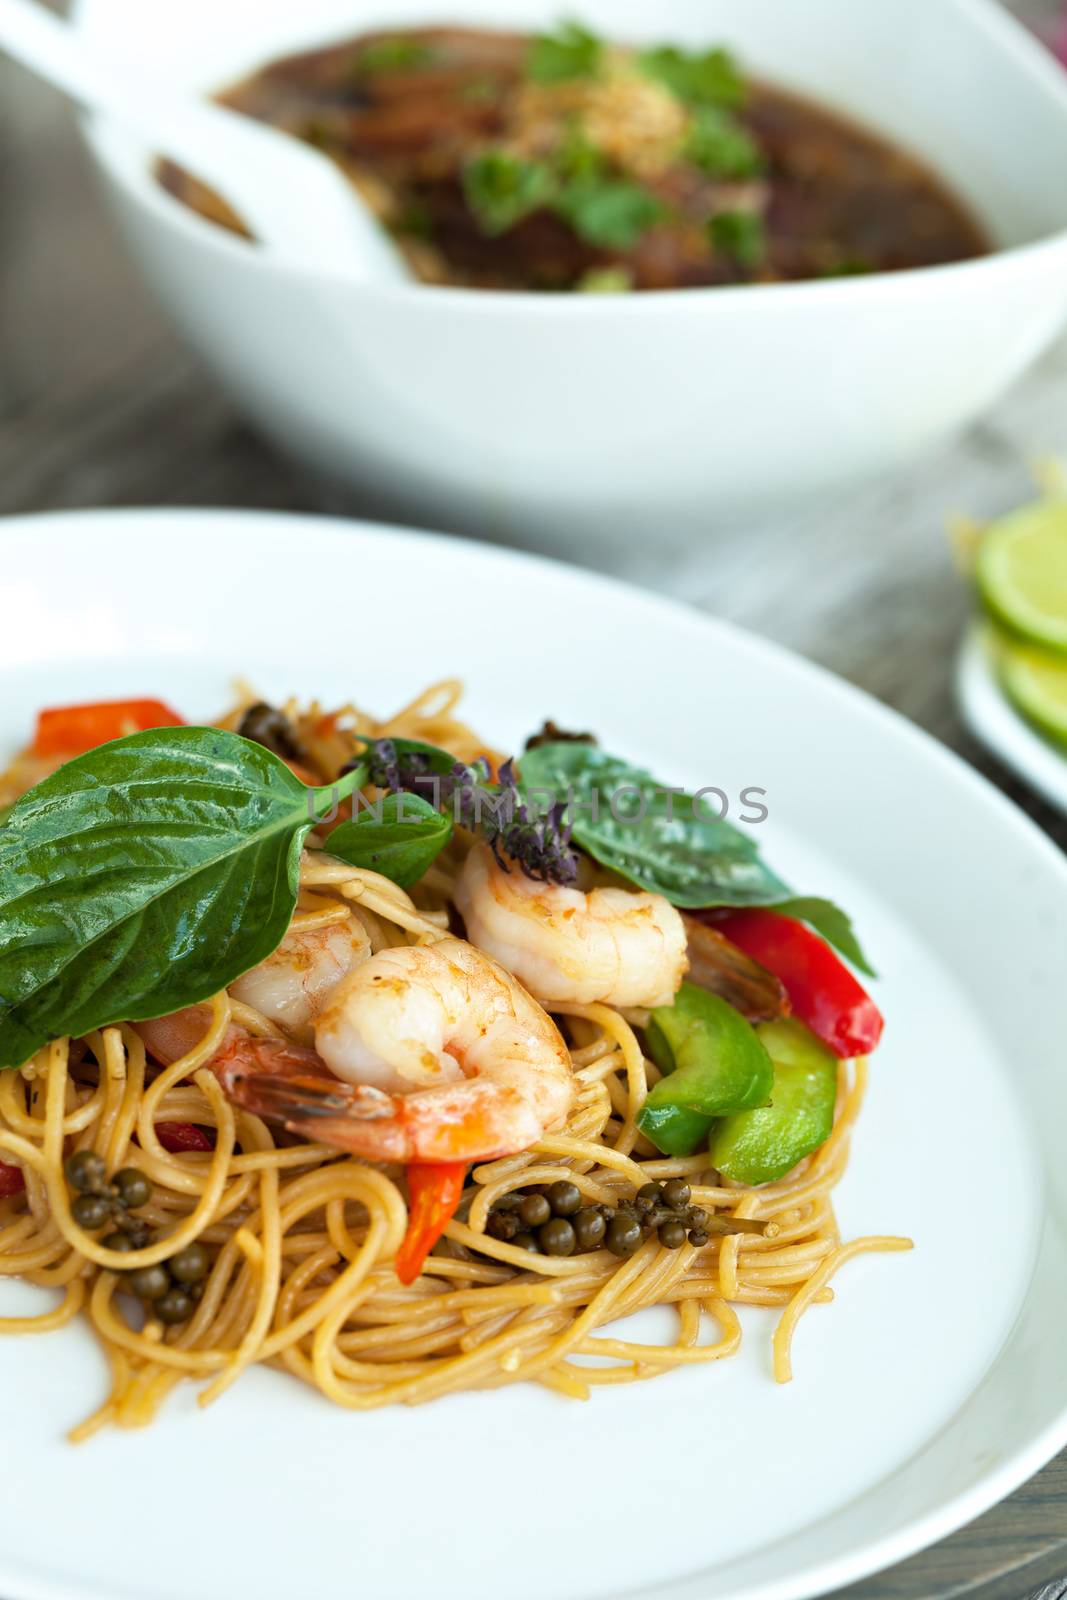 Thai Shrimp Dish with Noodles by graficallyminded